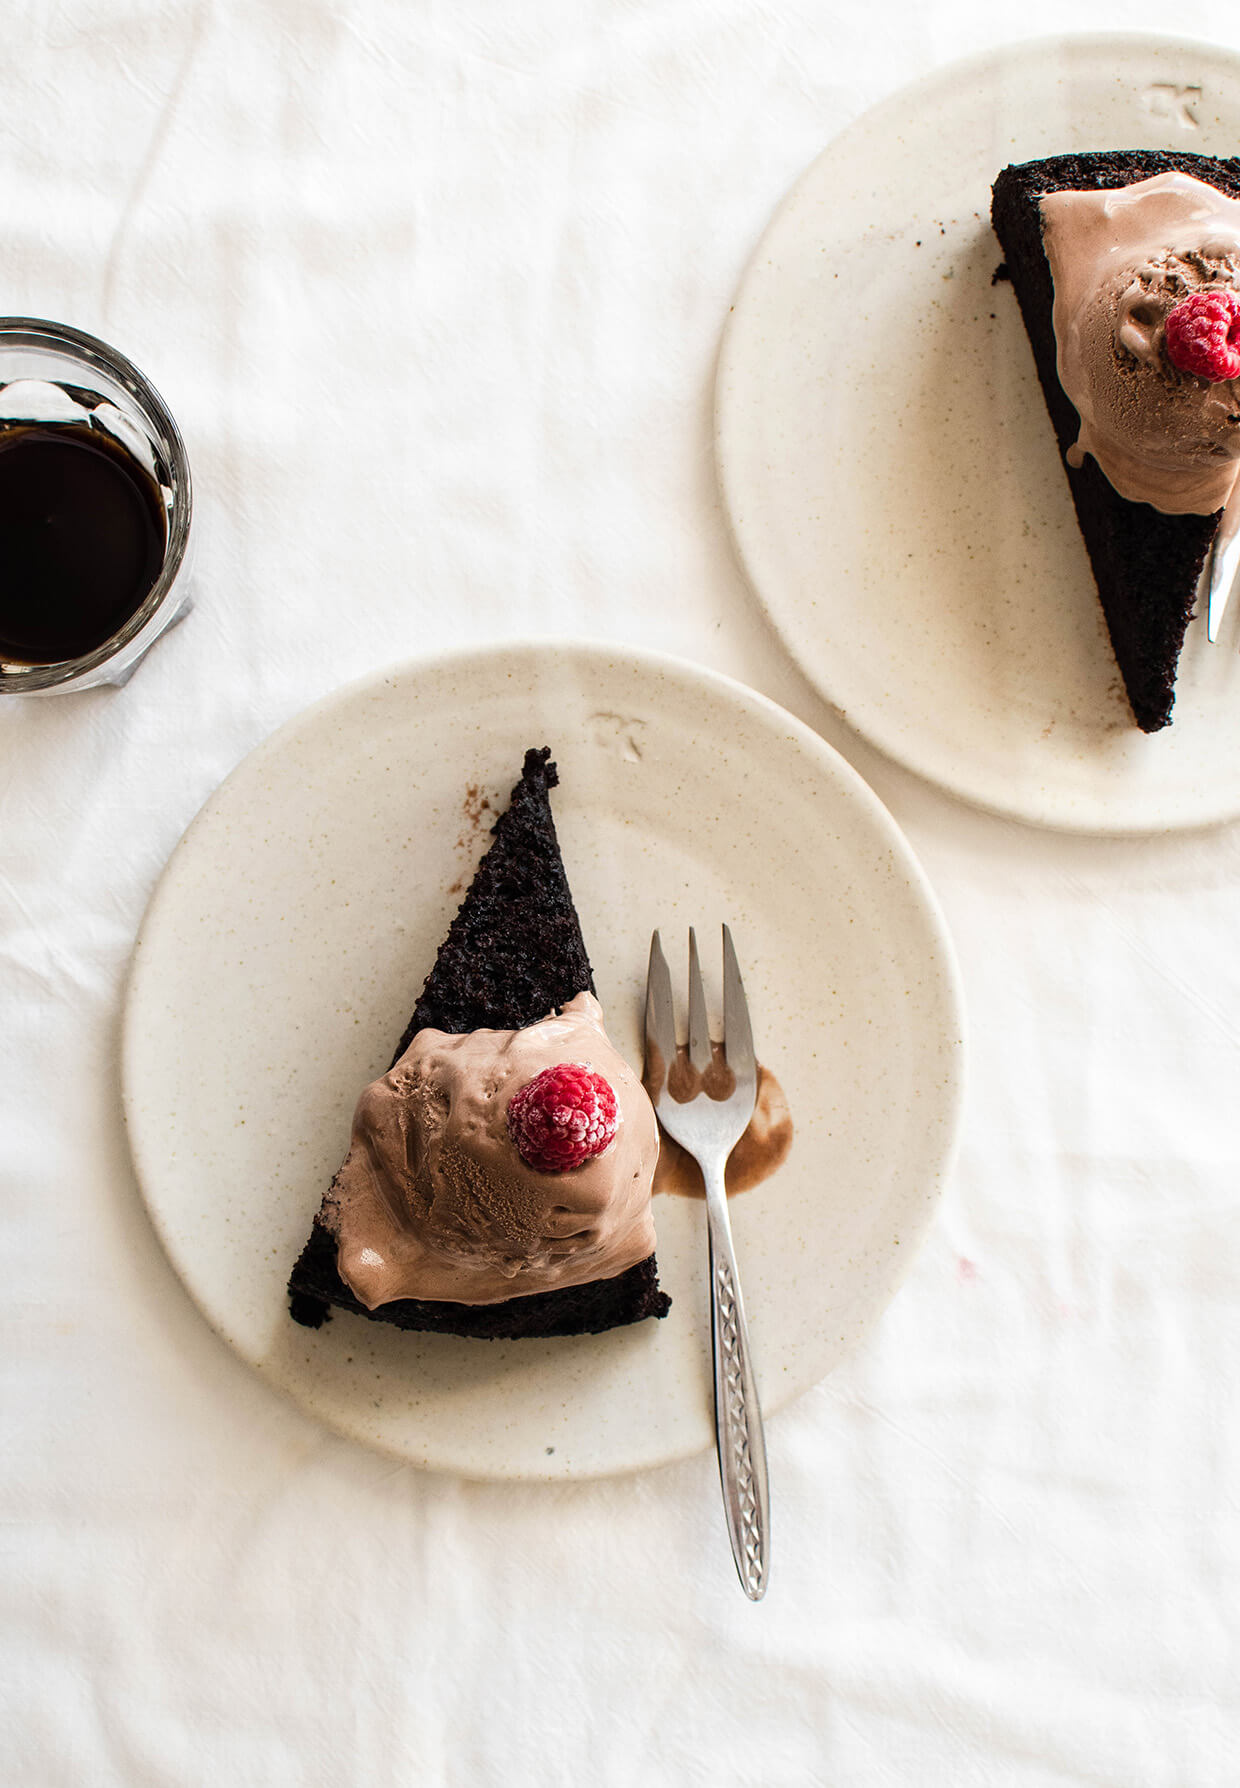 Pictured slices of chocolate cake with ice cream on plates (one chocolate cake - three ways to serve, learn how to transform one chocolate stout cake into something new each time you make it. )